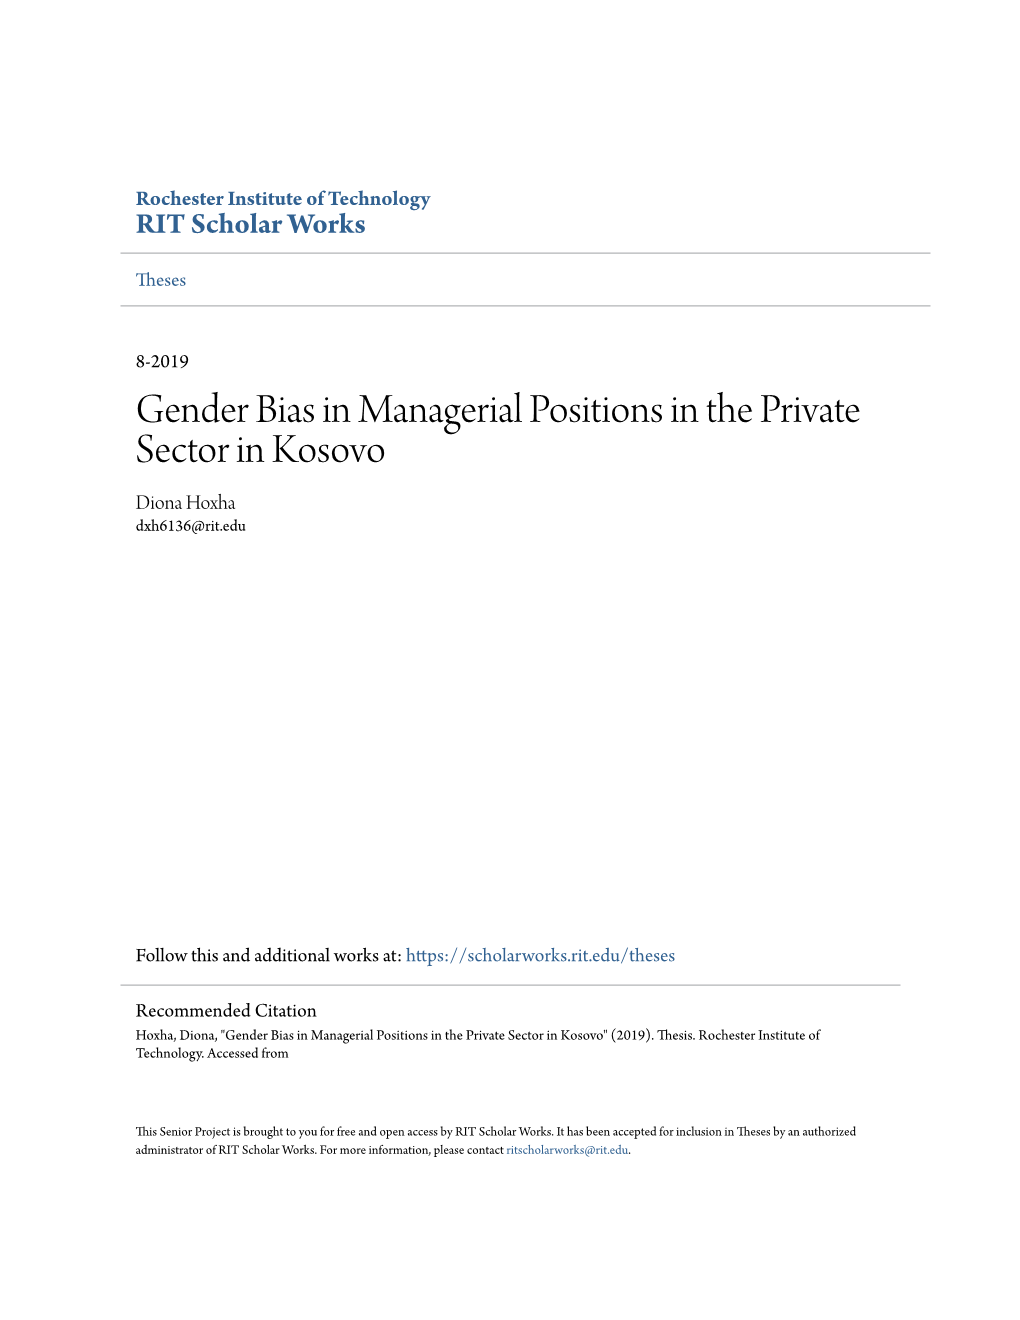 Gender Bias in Managerial Positions in the Private Sector in Kosovo Diona Hoxha Dxh6136@Rit.Edu